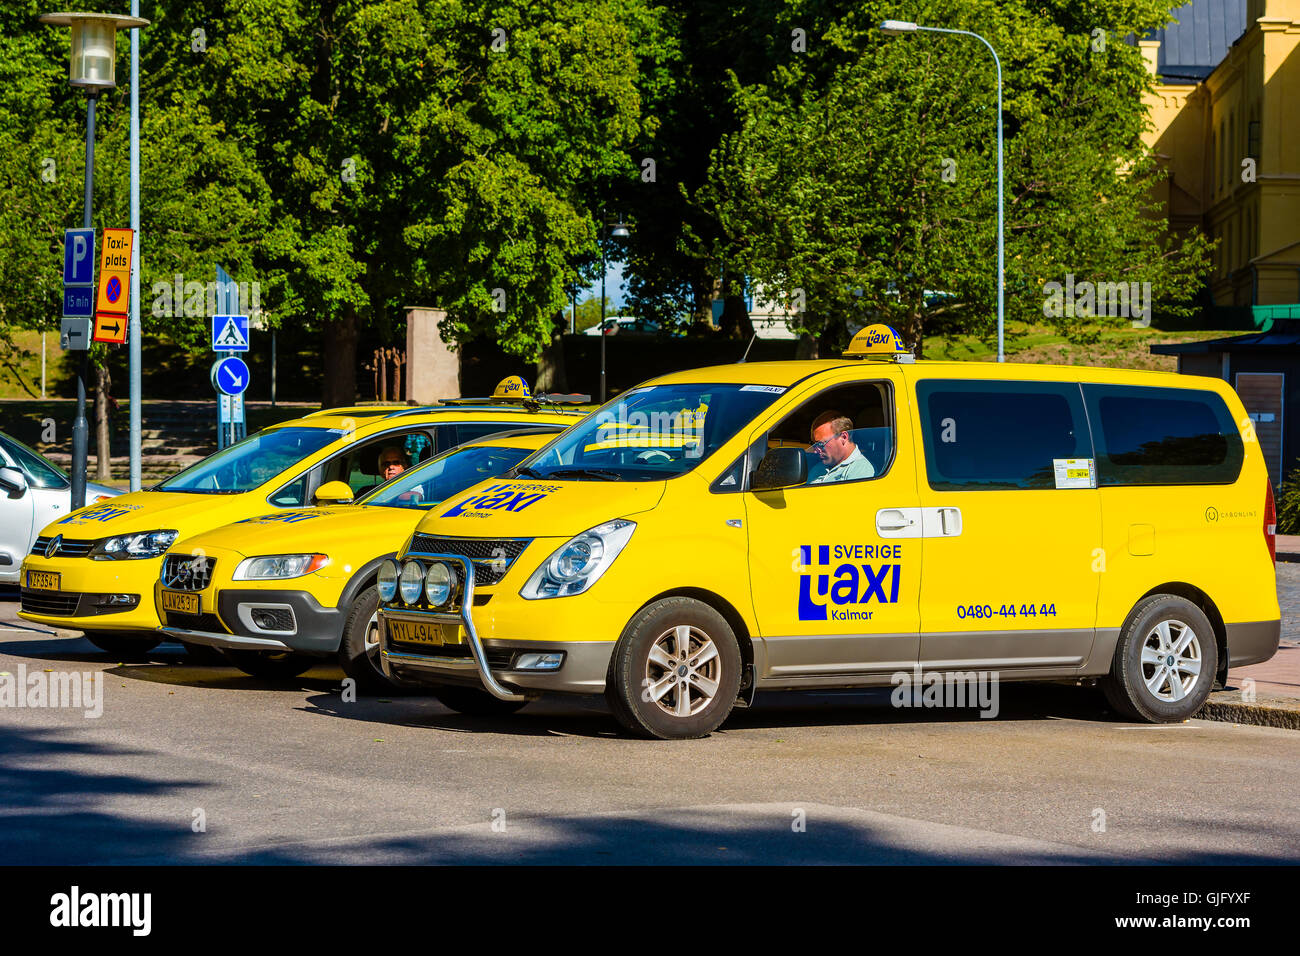 Kalmar, Sweden - August 10, 2016: Three yellow cab or taxi cars waiting for passengers. Sverige Taxi logo on cars. Front most ca Stock Photo